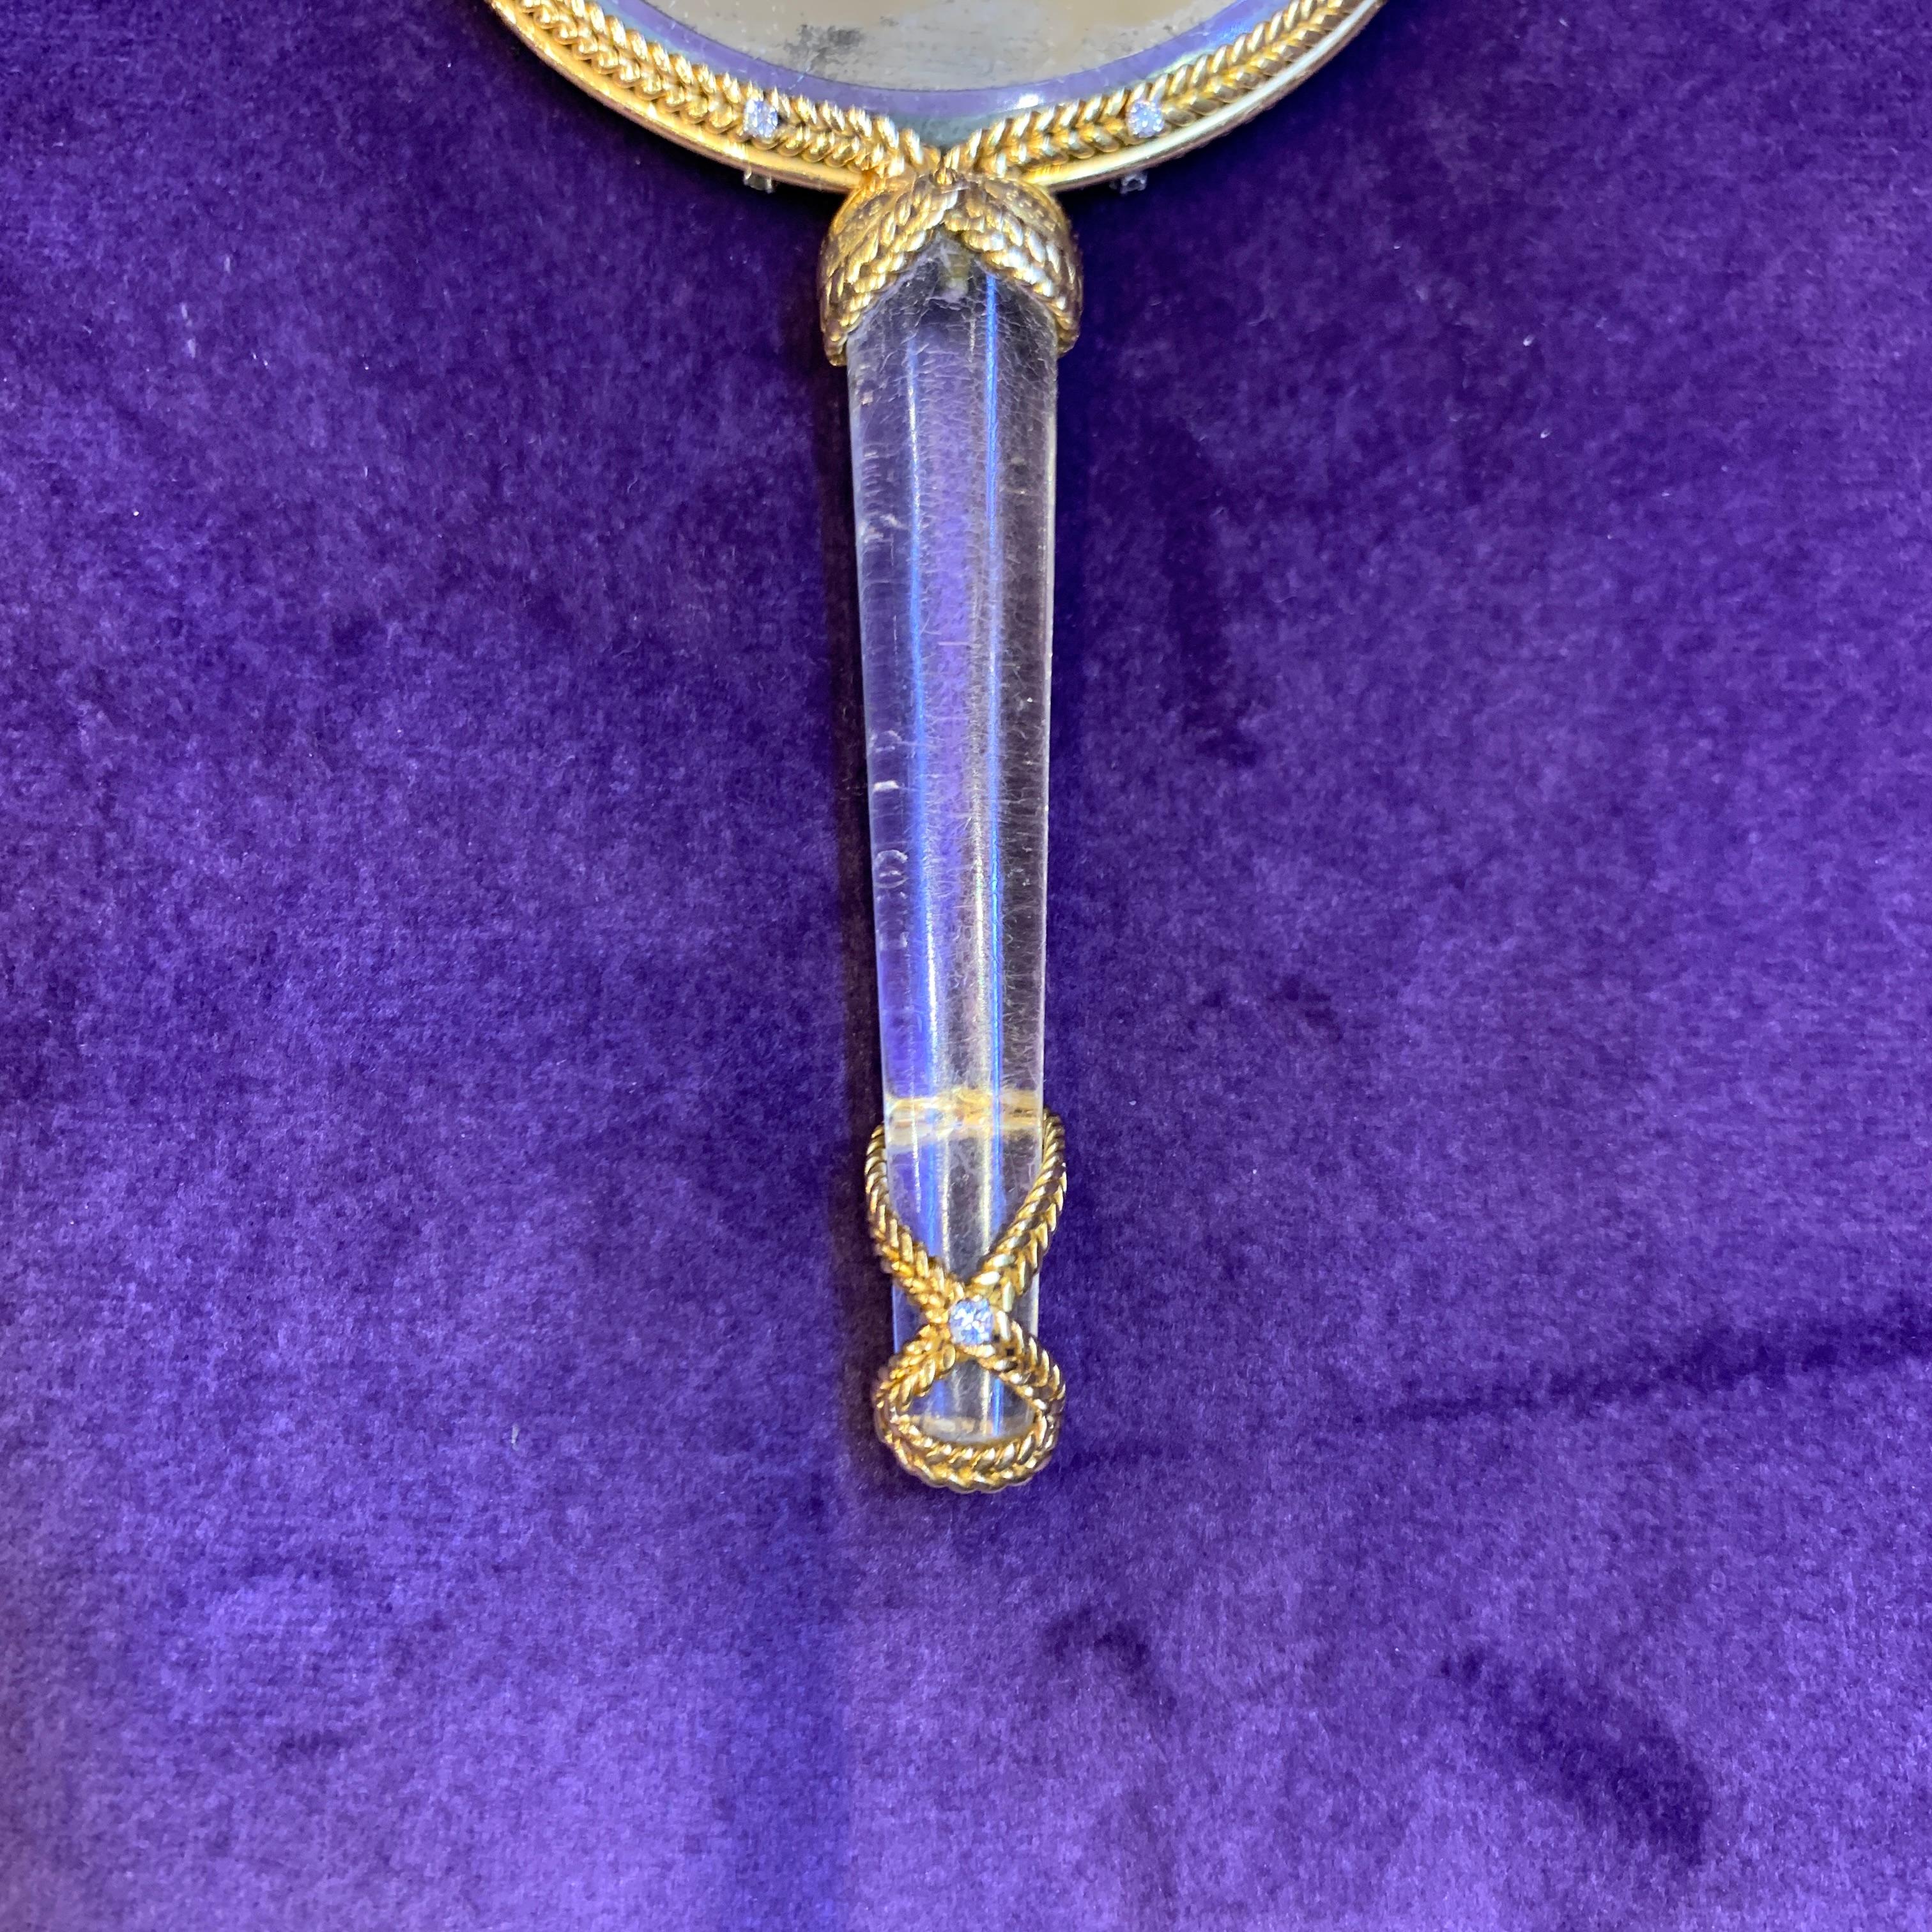 Sterle Gold Hand Mirror In Excellent Condition For Sale In New York, NY